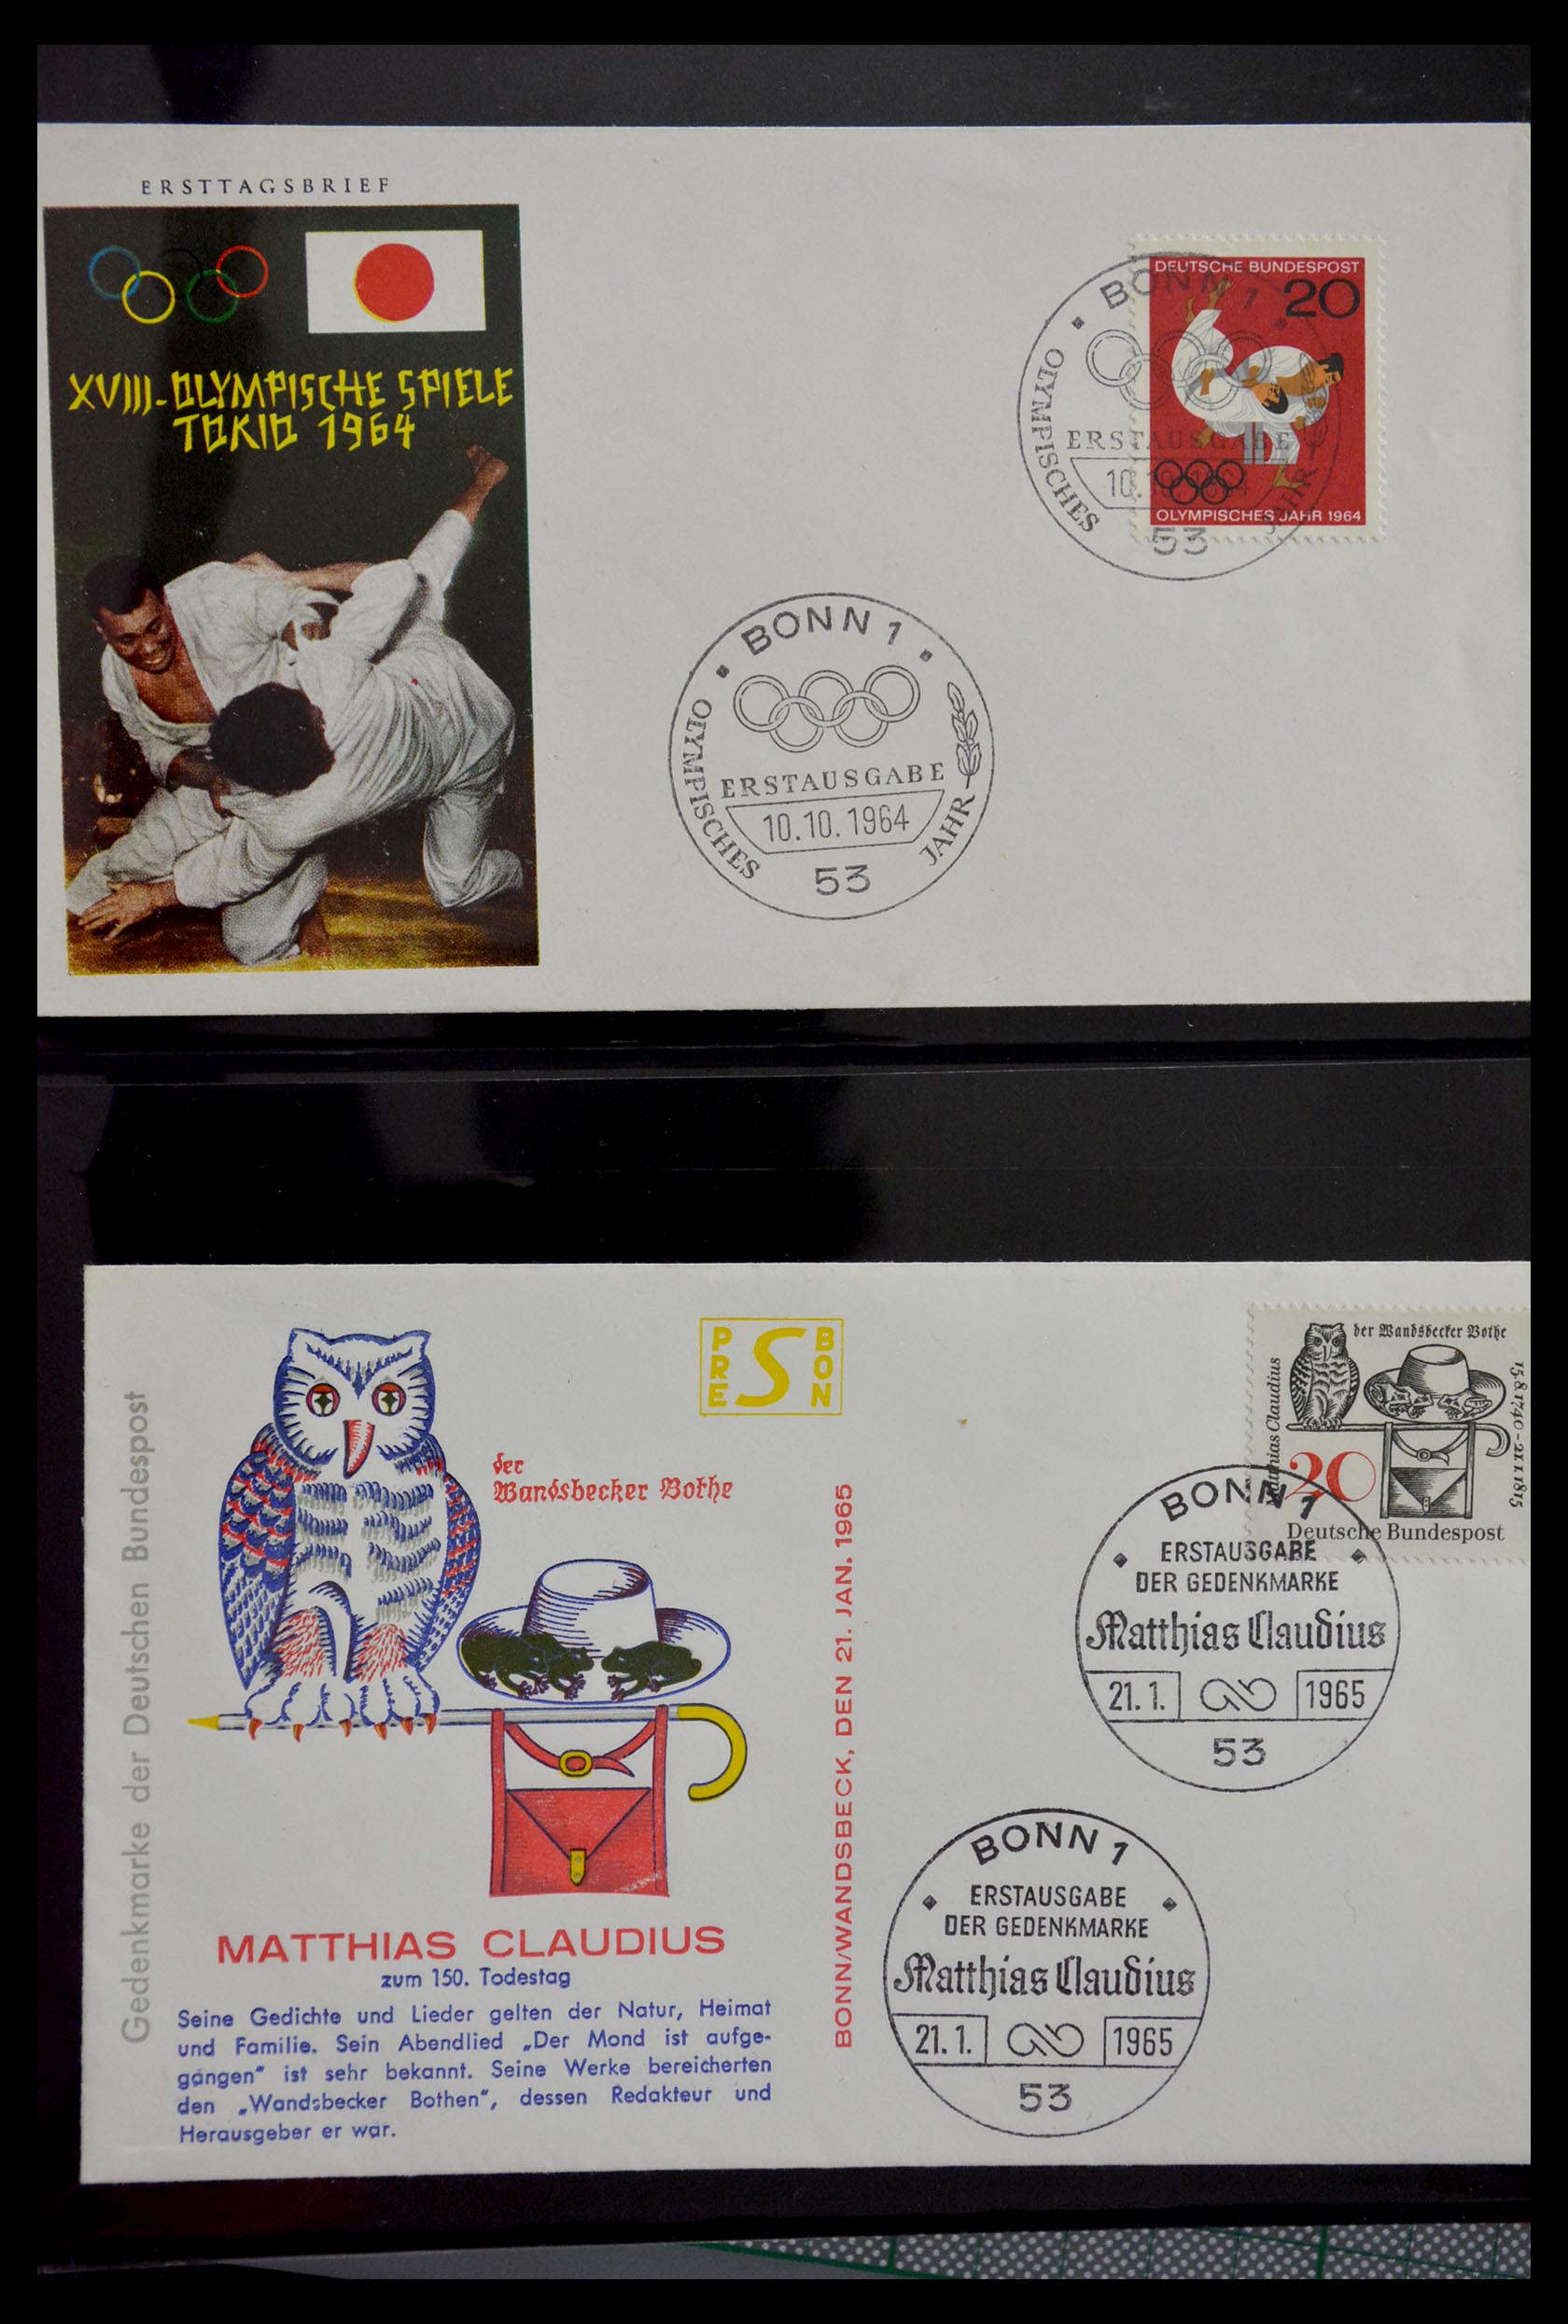 29382 036 - 29382 Germany covers and FDC's 1936-1965.